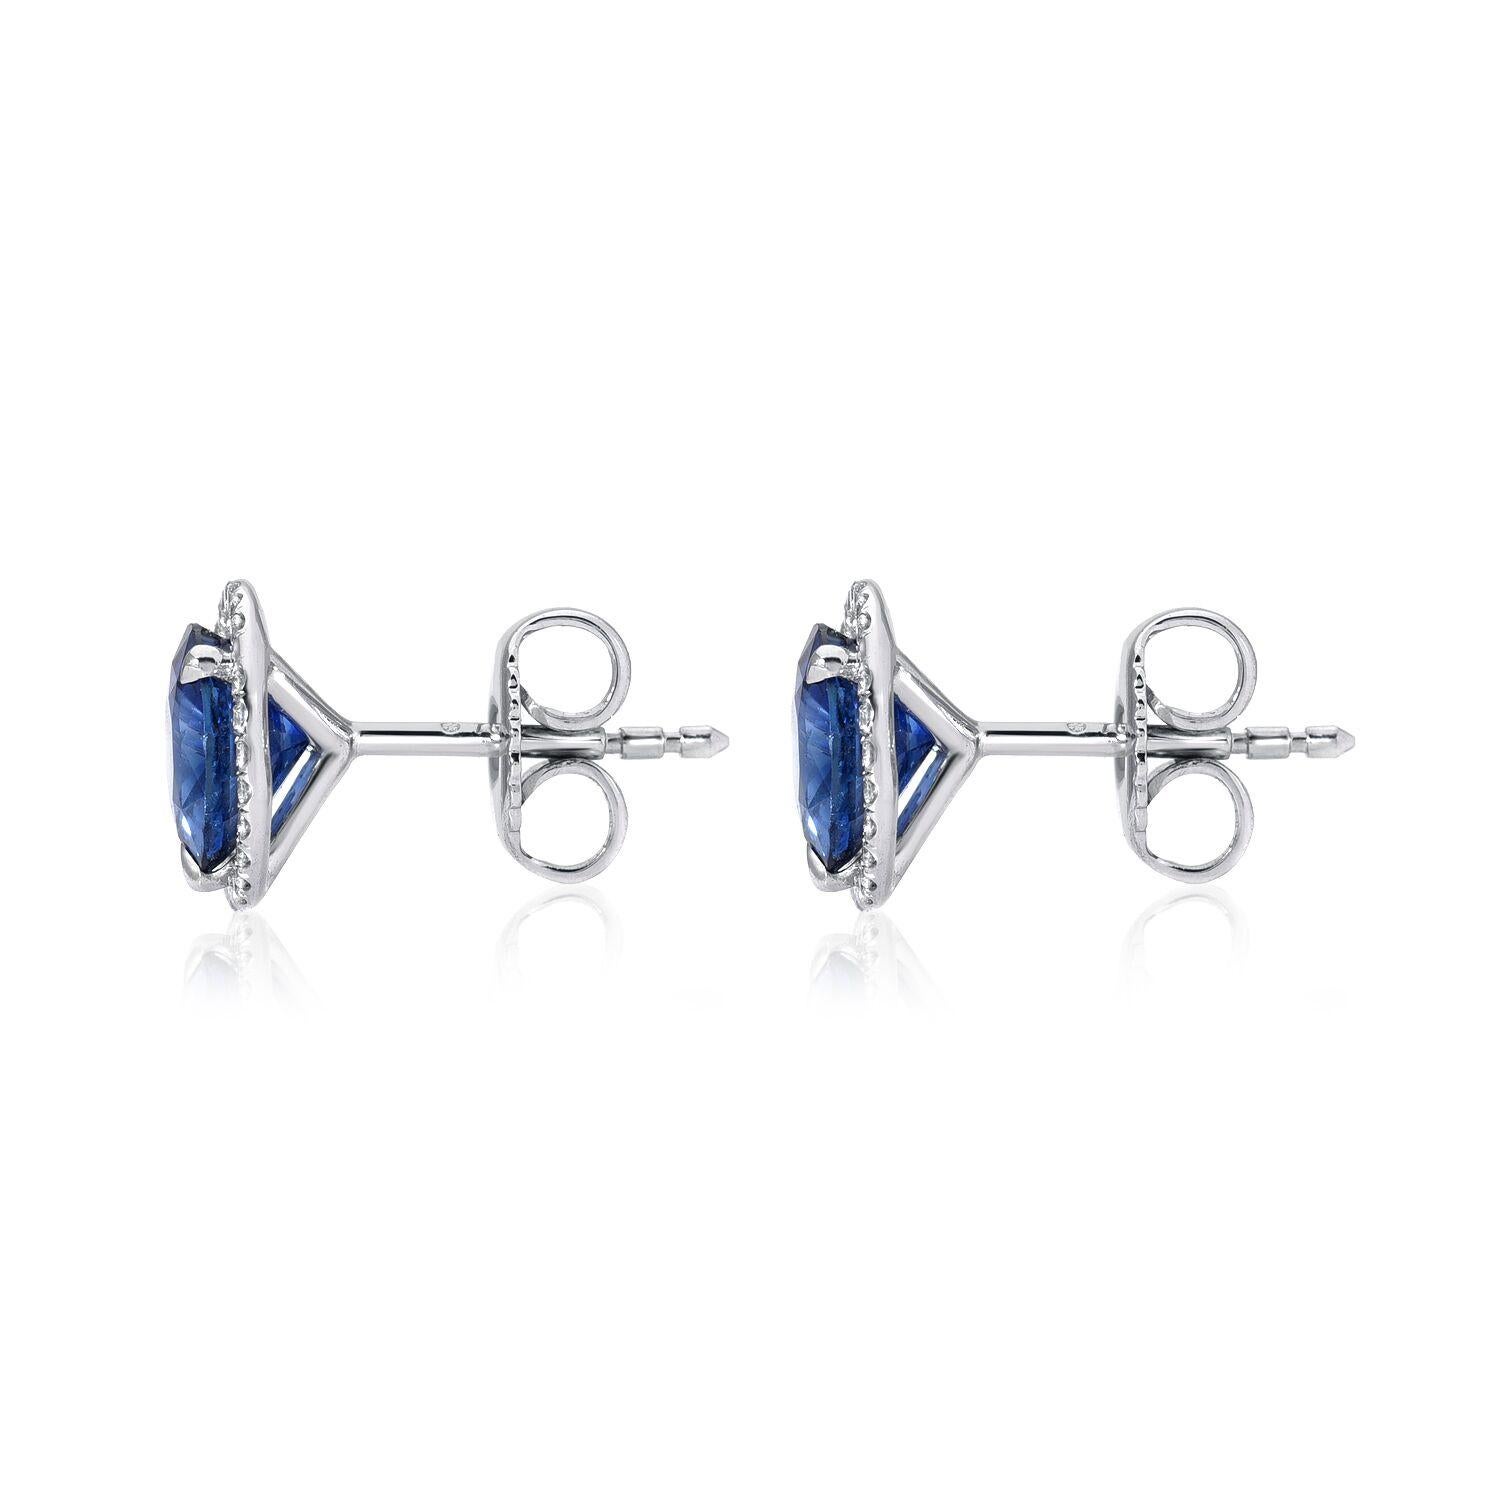 Sapphire stud earrings featuring a pair of round Sapphires weighing a total of 2.19 carats surrounded by a total of 0.25 carats of round brilliant diamonds, in 18K white gold.
Returns are accepted and paid by us within 7 days of delivery.

Sapphire